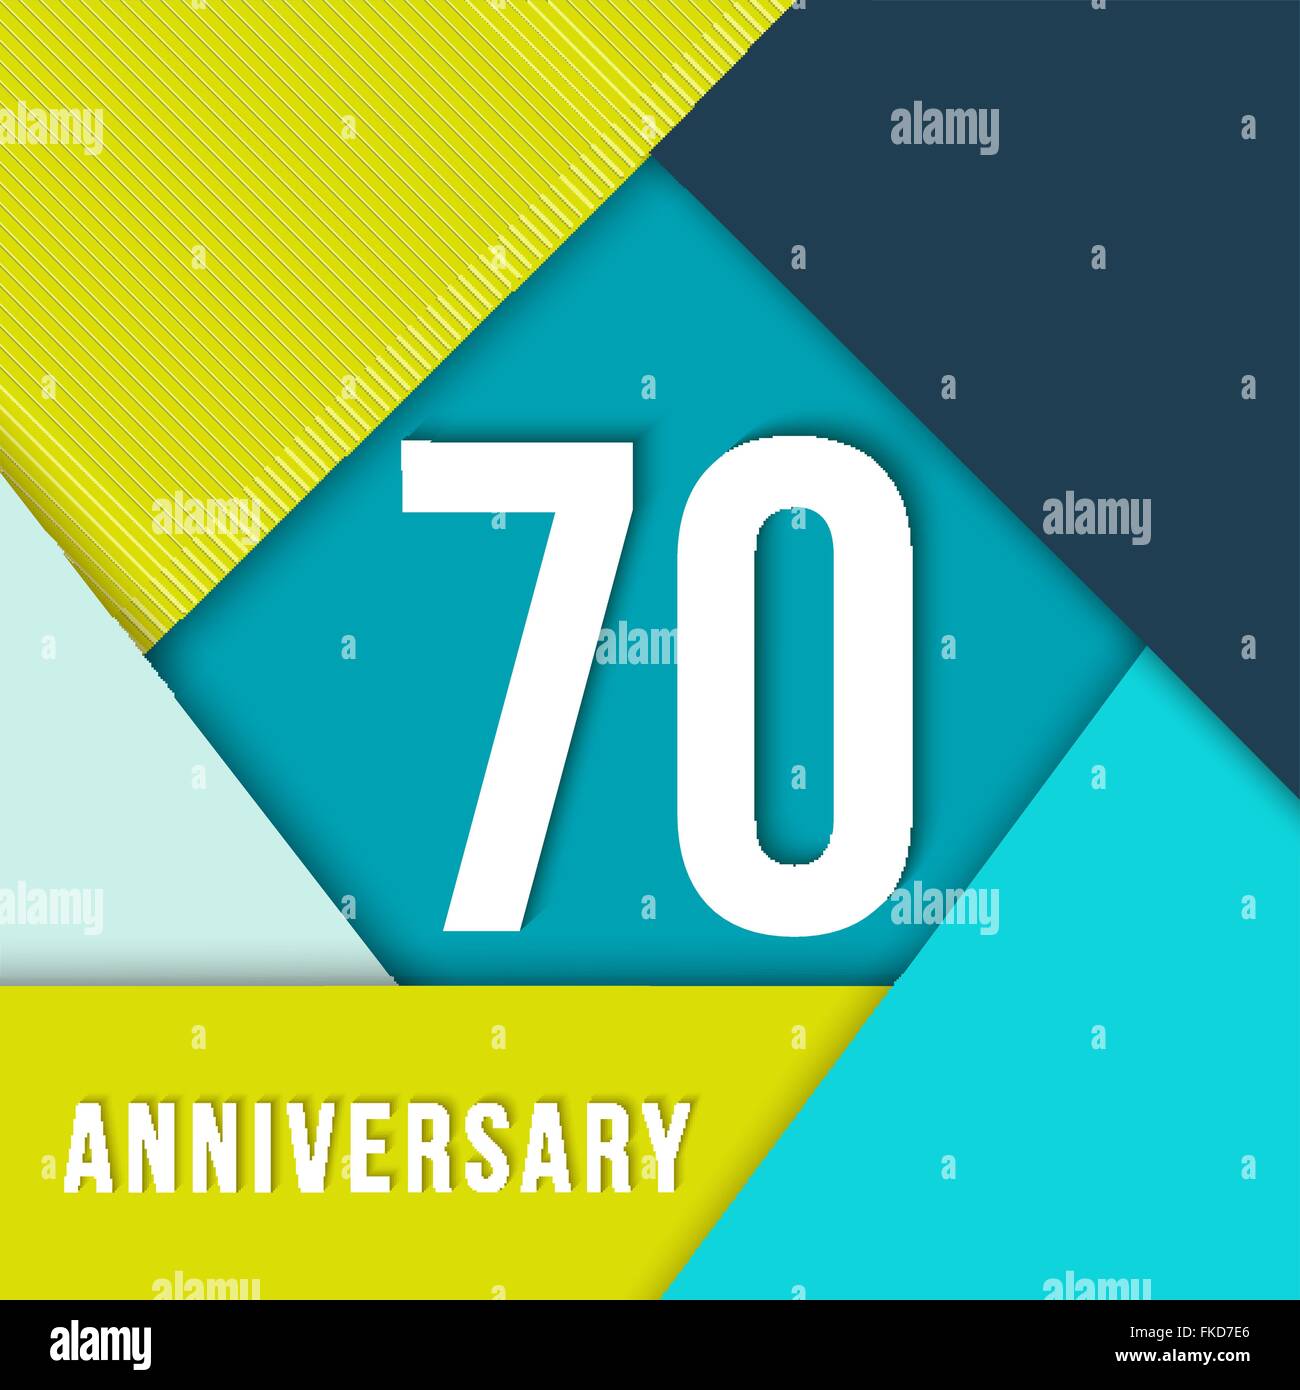 70 seventy year anniversary colorful template with number, text label and geometry shapes in flat material design style. Stock Vector